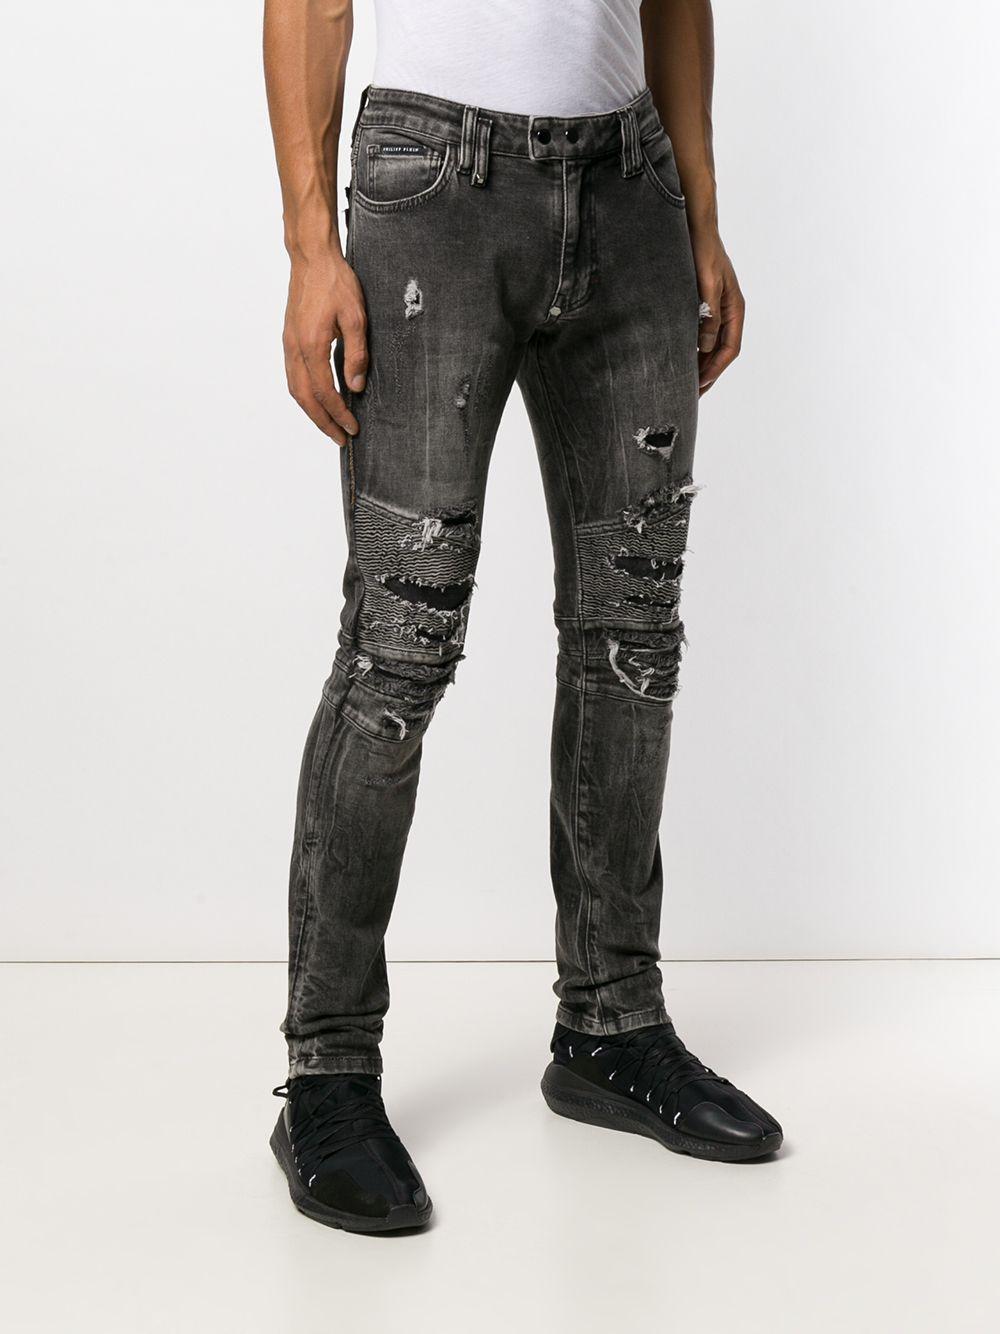 Lyst - Philipp Plein Distressed Skinny Jeans in Gray for Men